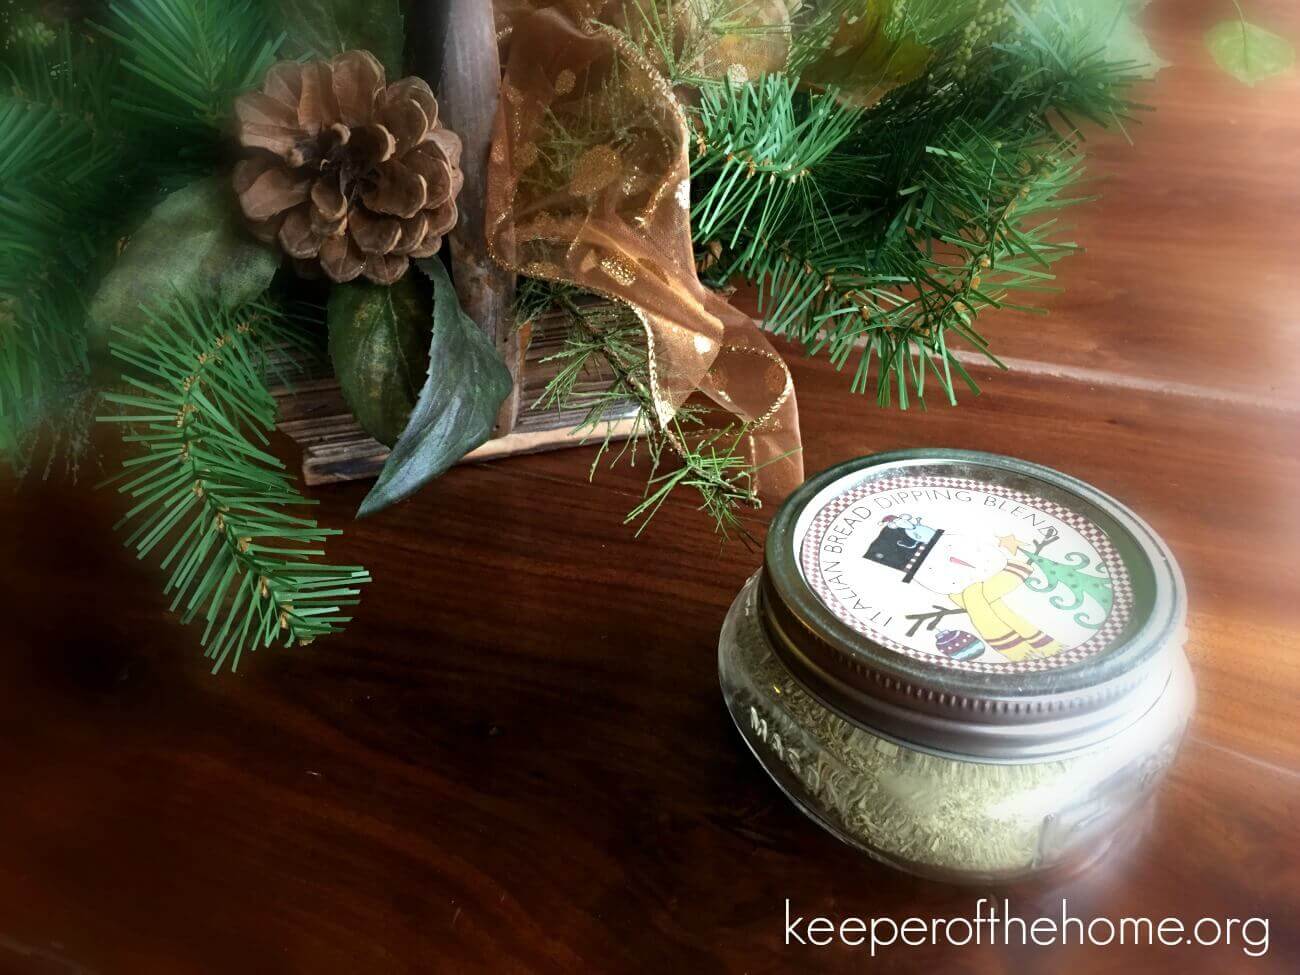 One of my favorite gifts last year was this jar of homemade bread spices. ~ KeeperoftheHome.org